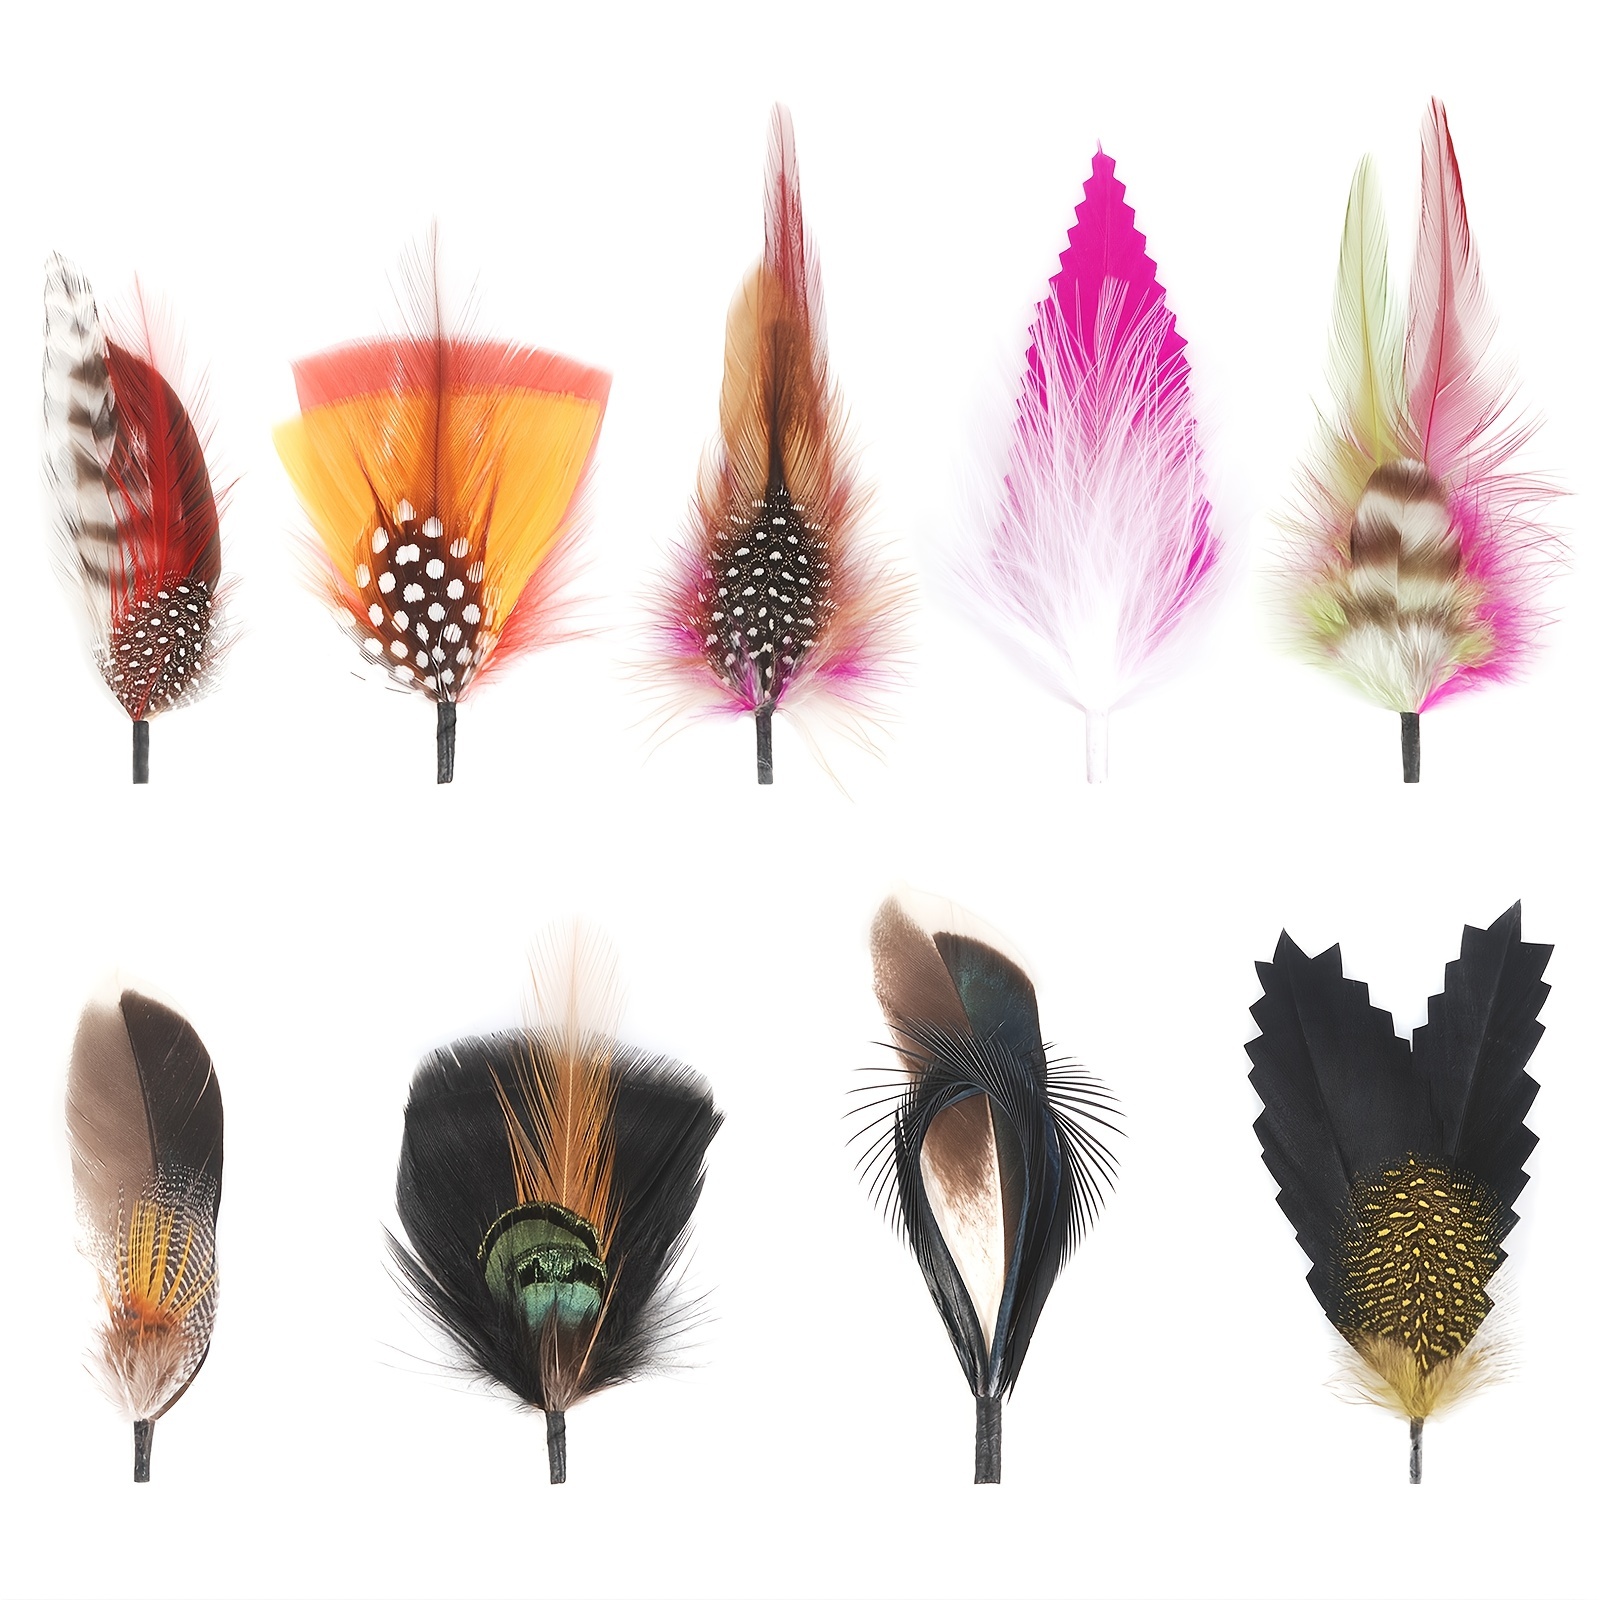 20 Pcs Hat Feathers Assorted Feathers for Fedora Hats Colorful Real Feathers  Accessories for Men Women (Classic Style)